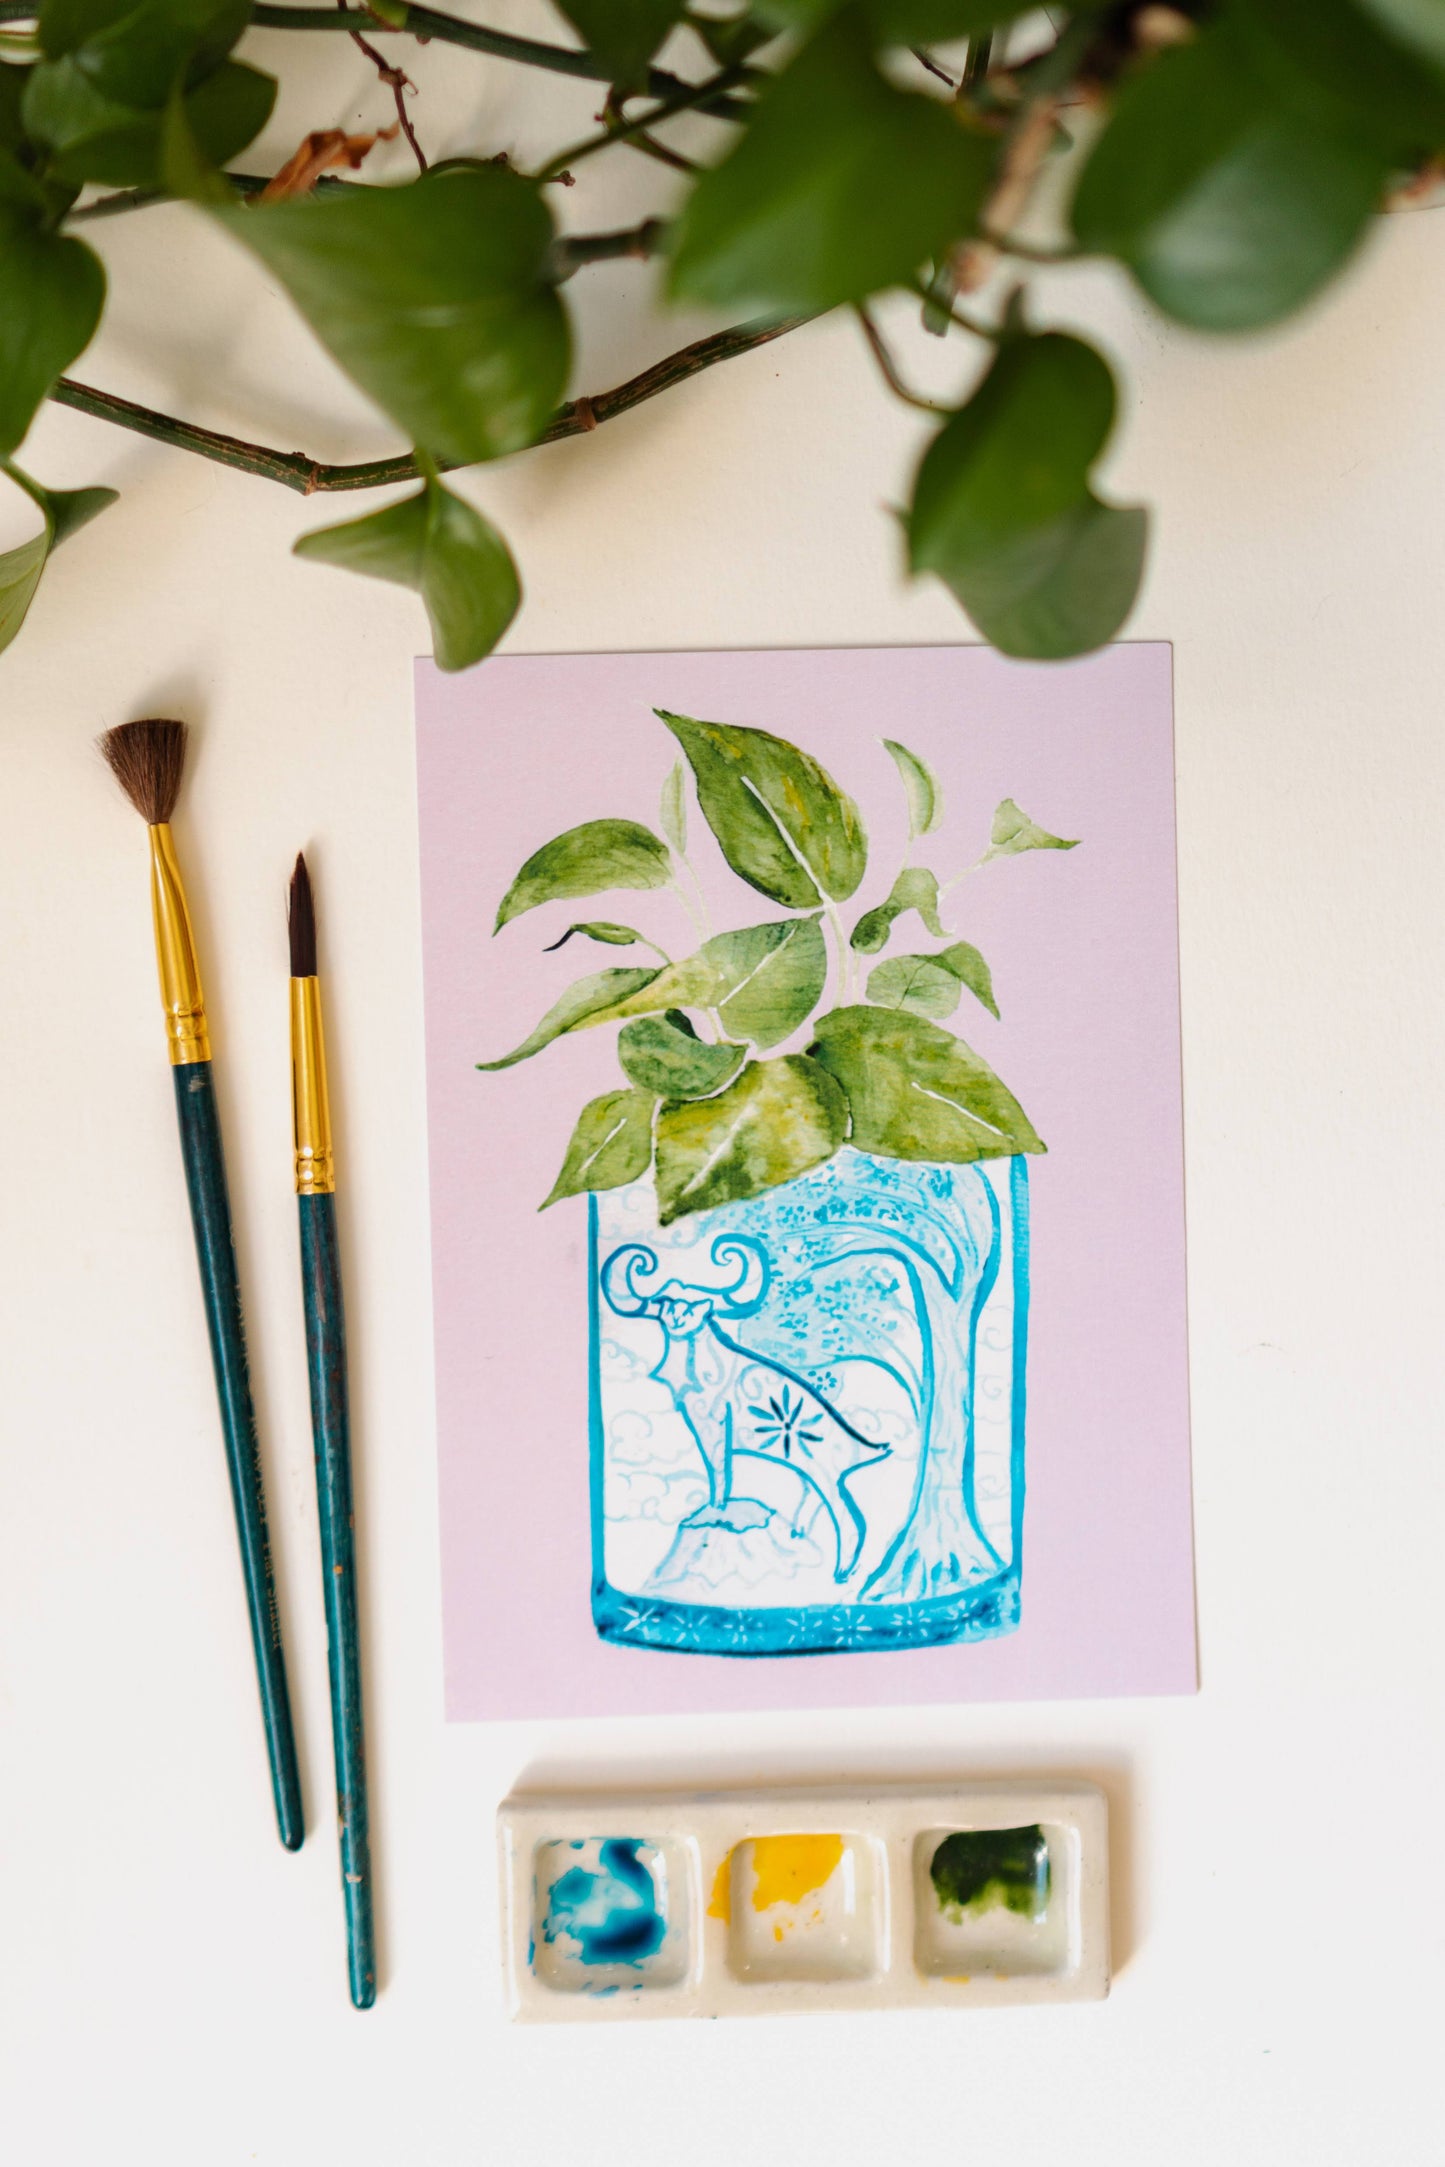 Year of the Goat + Pothos Print